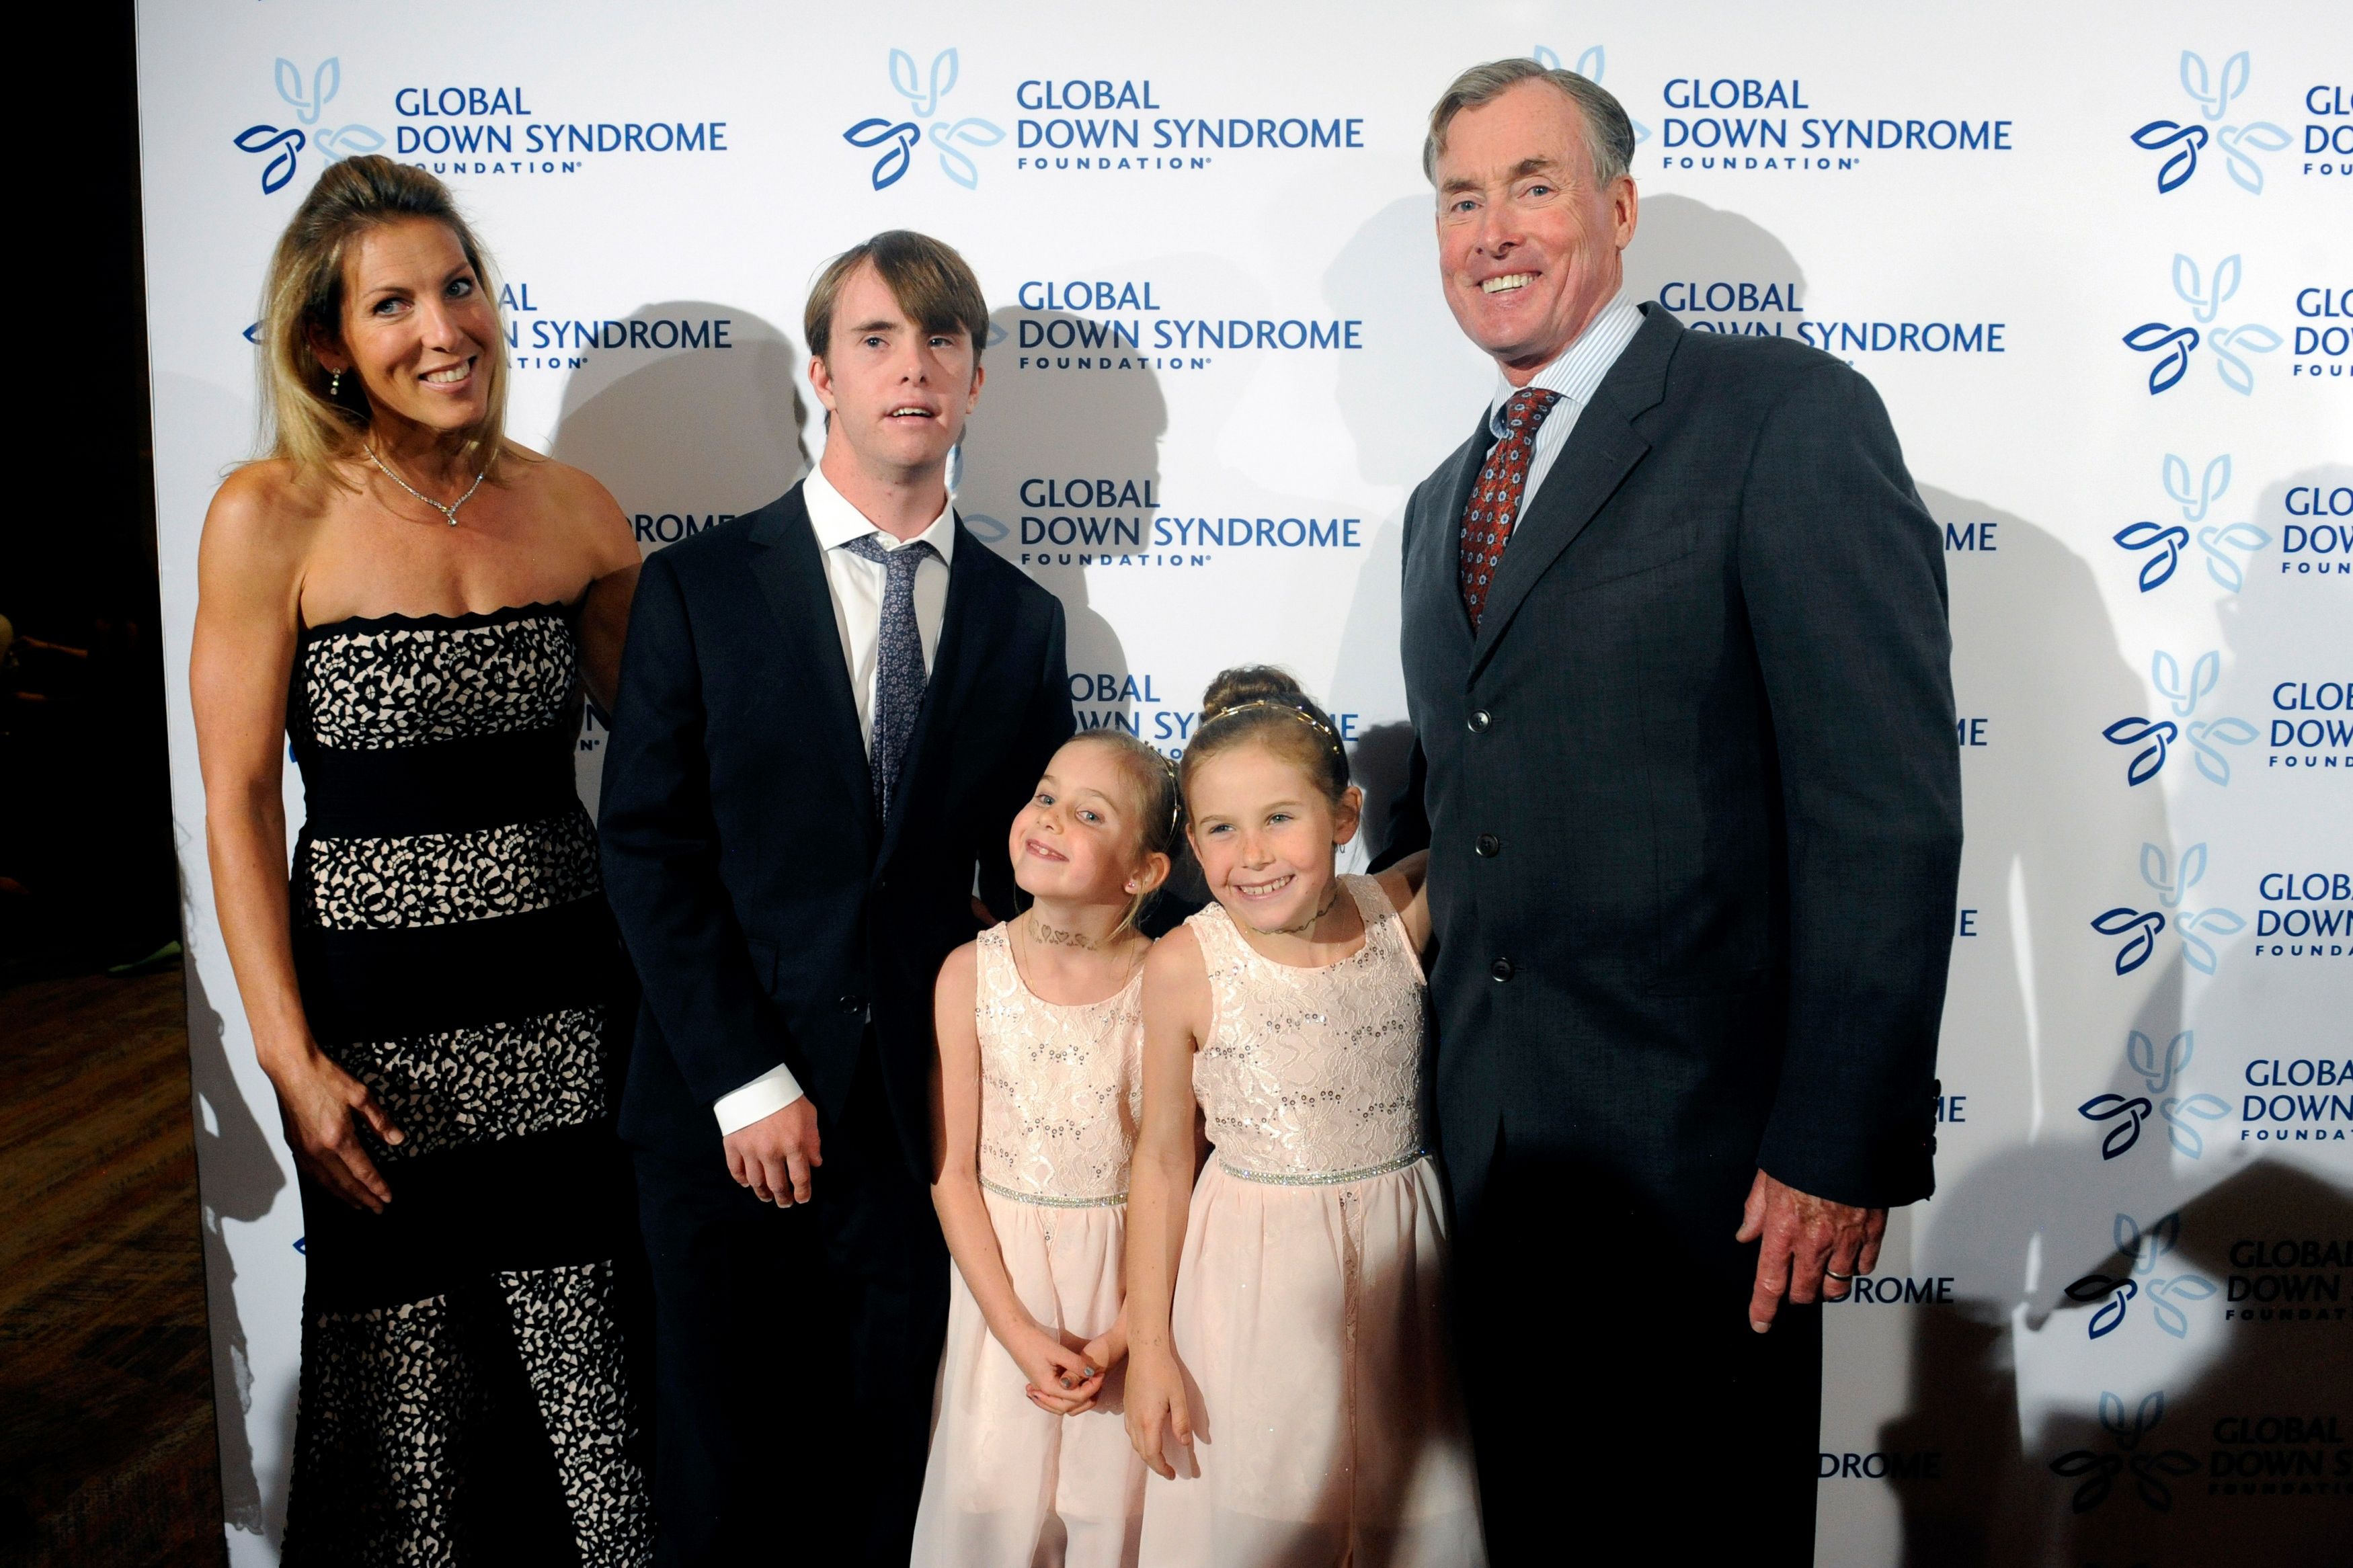 John C. McGinley with his wife Nichole Kessler, son Max, and daughters Kate and Billie at the Global Down Syndrome Foundation "Be Beautiful, Be Yourself" fashion show in Colorado  in 2016 | Getty Images